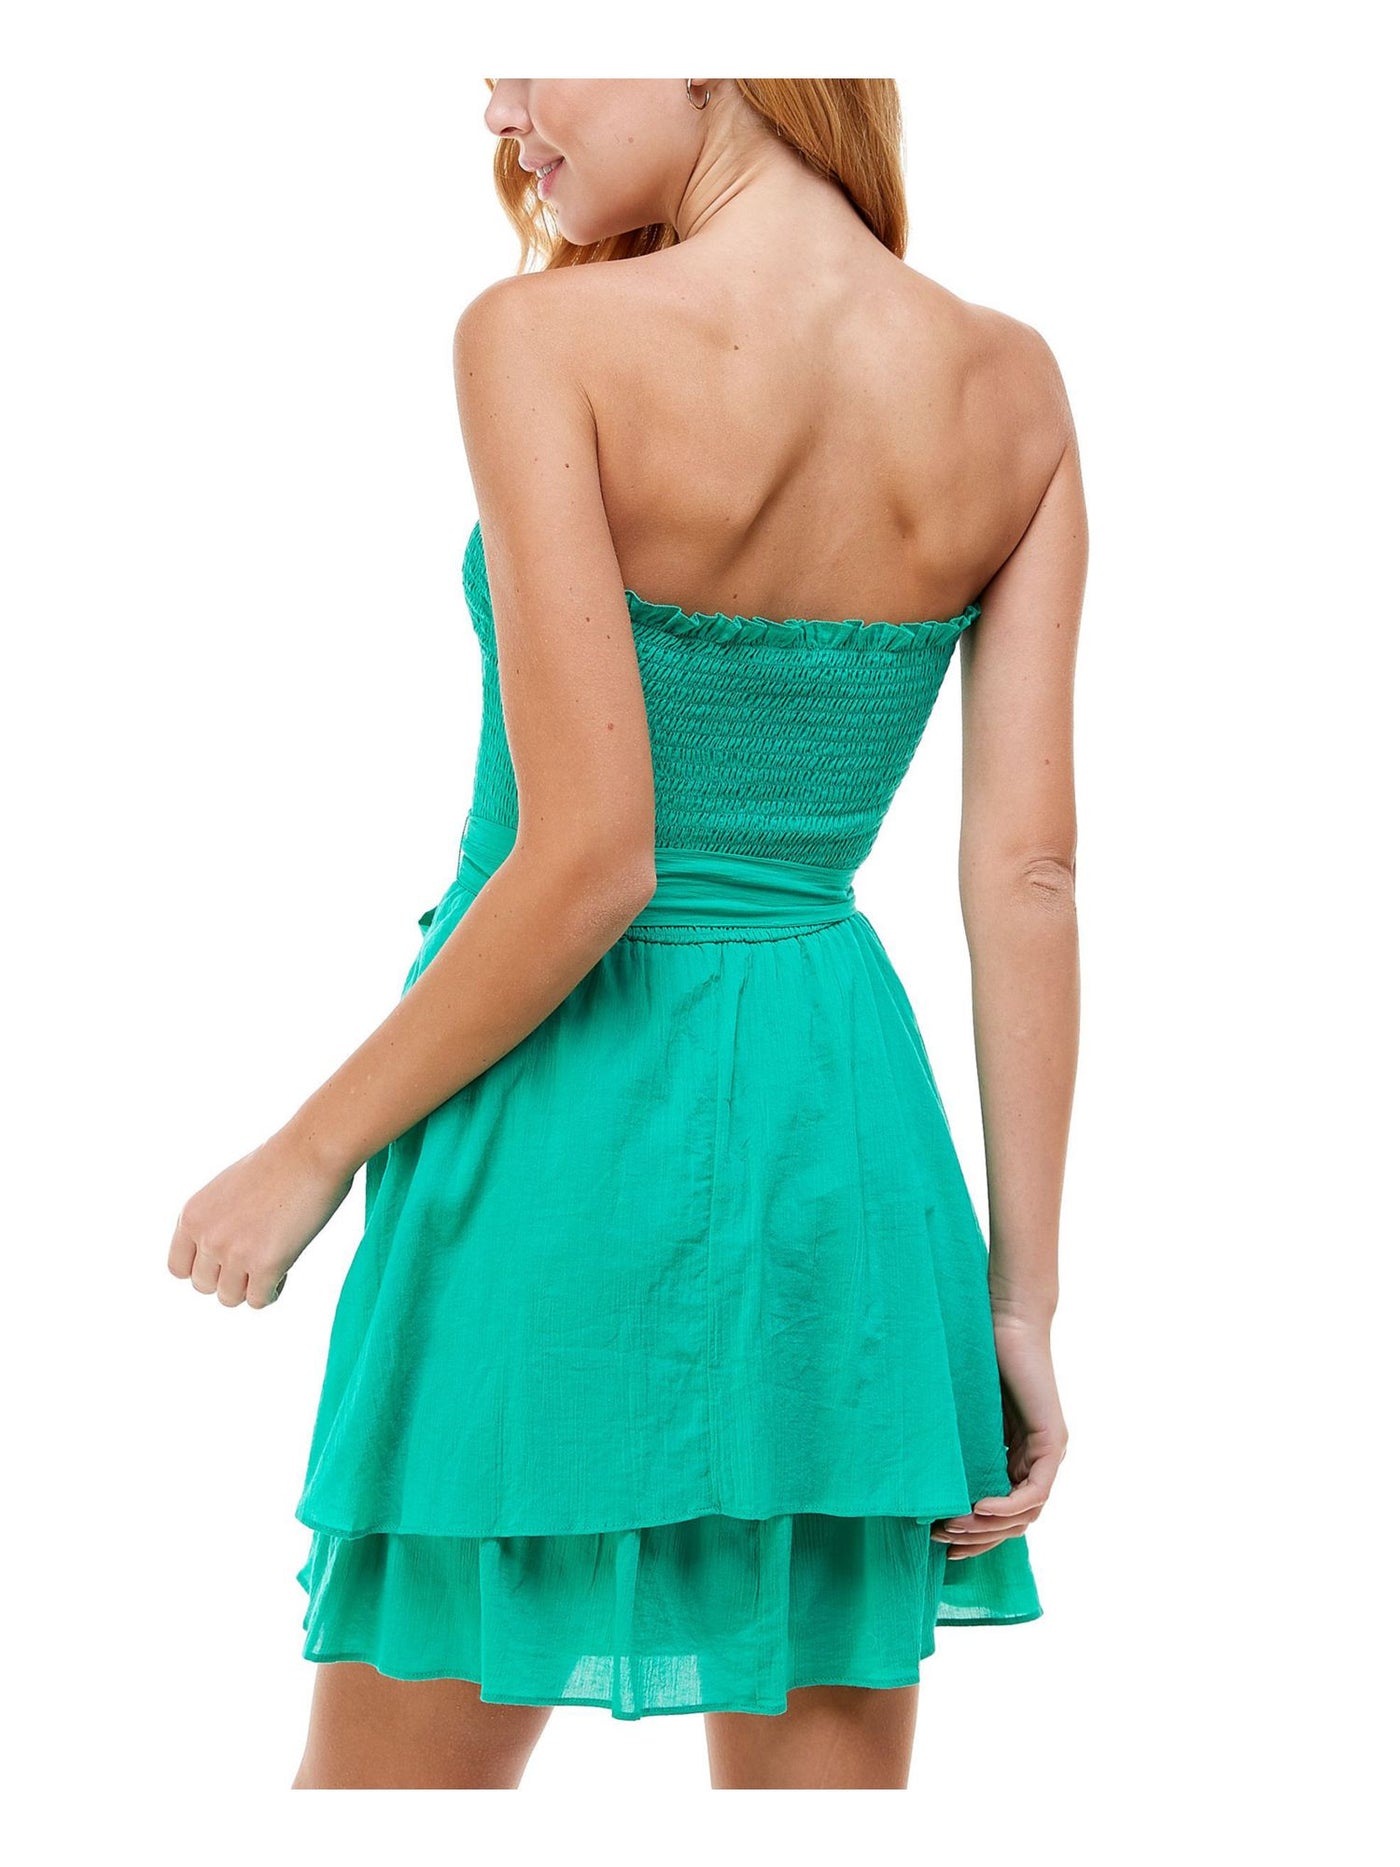 CITY STUDIO Womens Green Ruffled Tie Smocked Strapless Short Party Fit + Flare Dress Juniors S